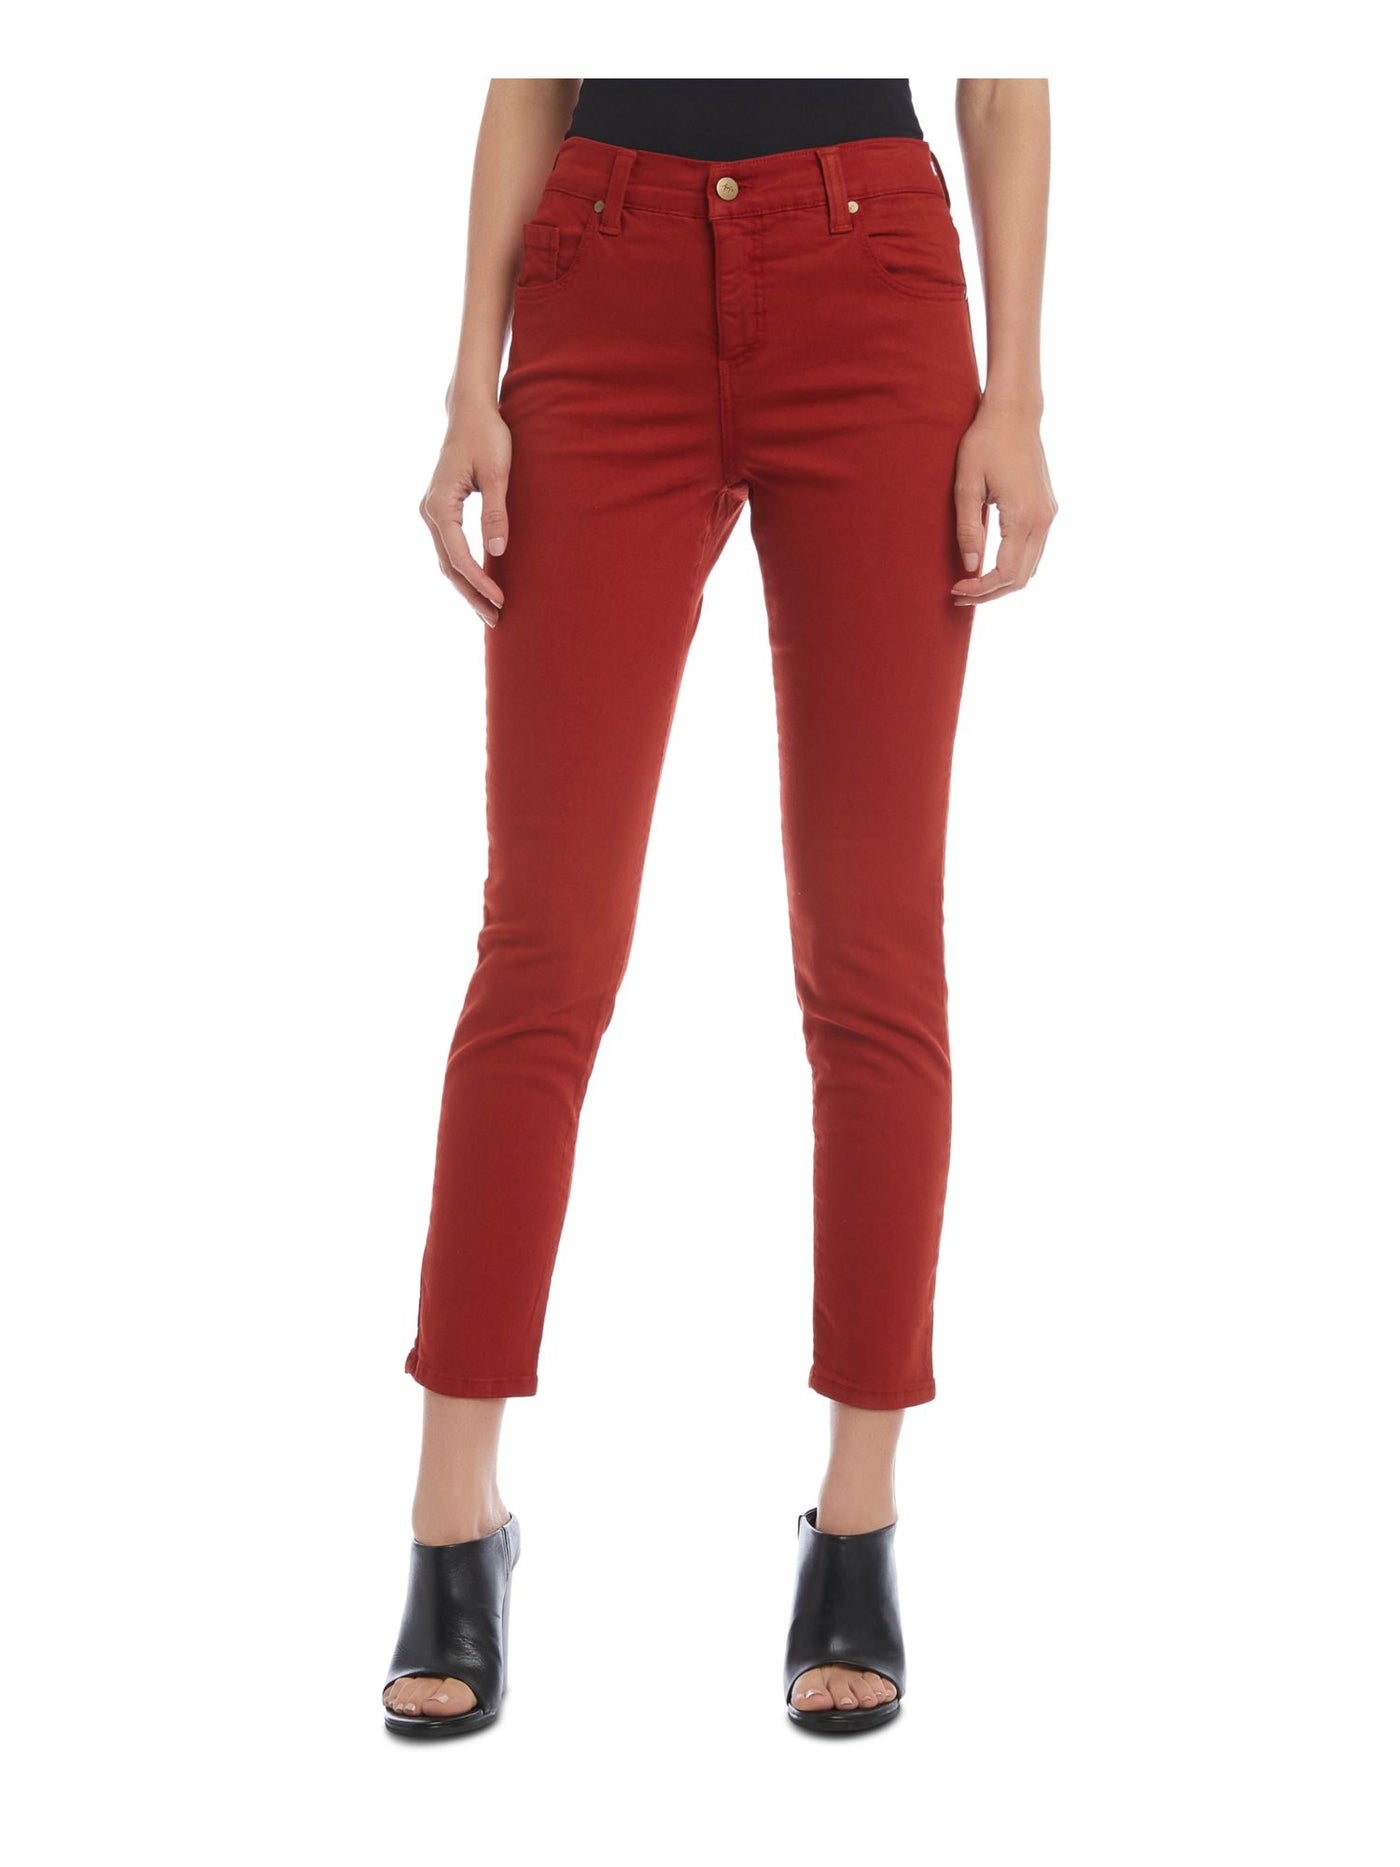 KAREN KANE Womens Red Stretch Zippered Pocketed Cropped Ankle Skinny Jeans 6